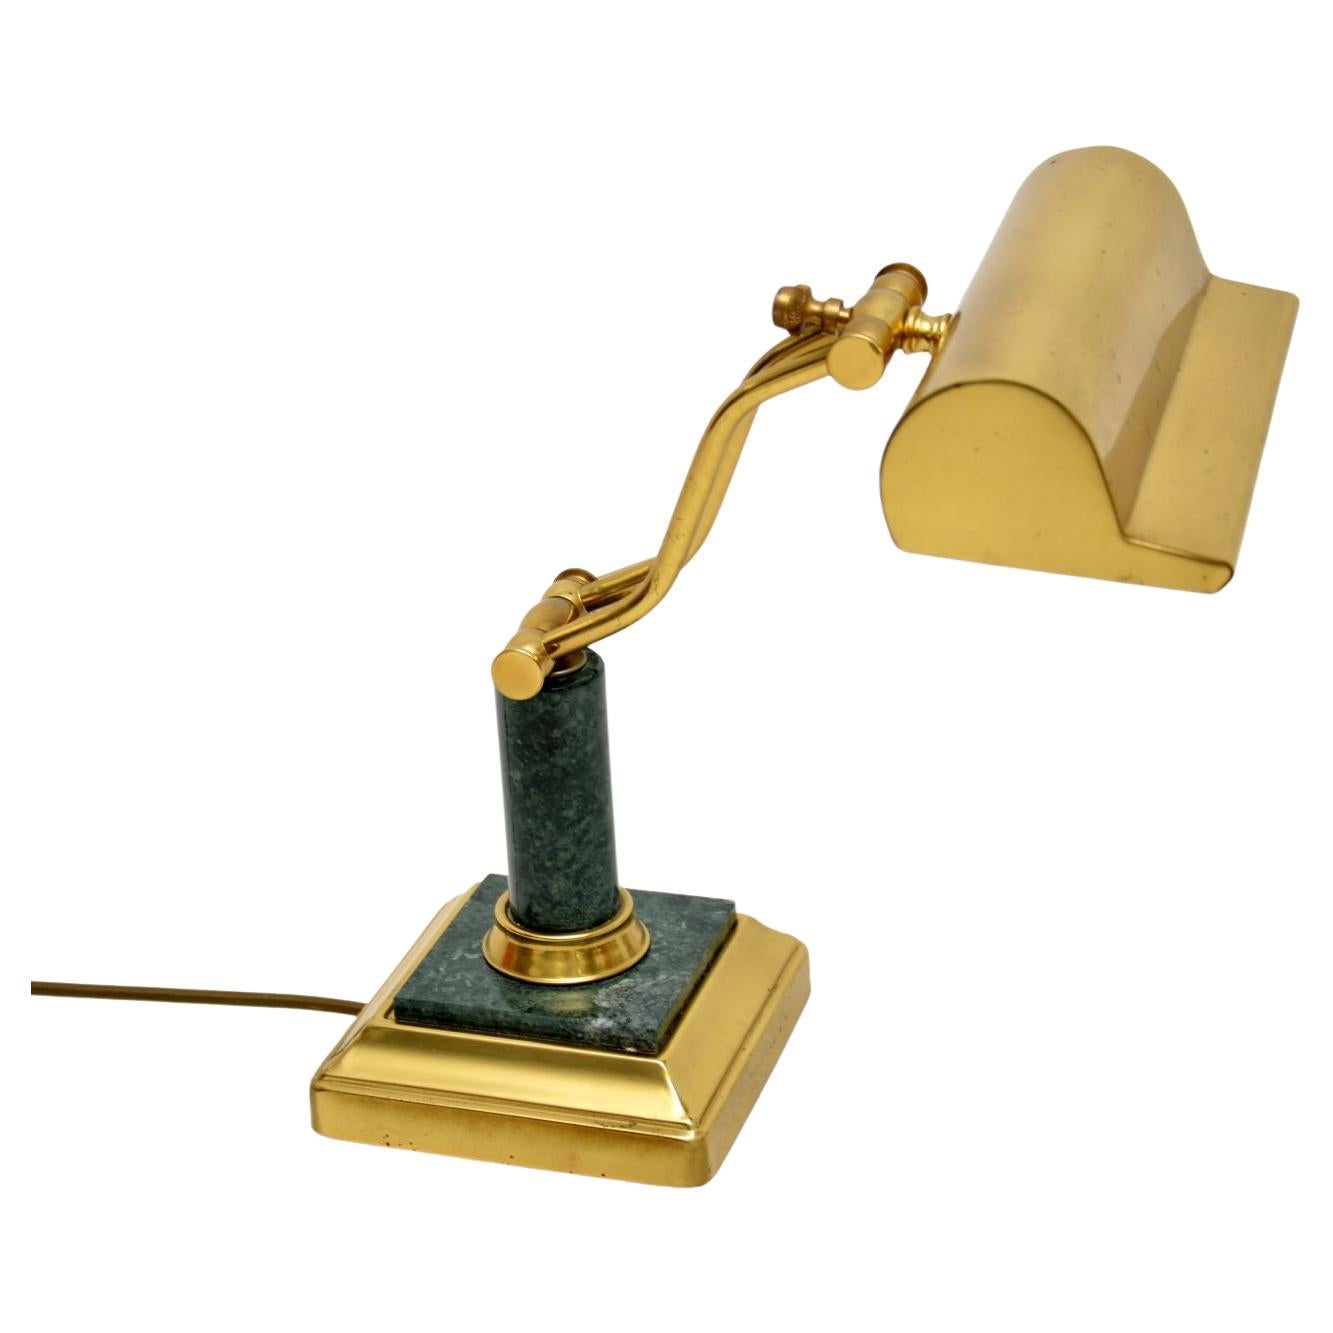 Vintage French Art Deco Desk Lamp in Brass and Marble